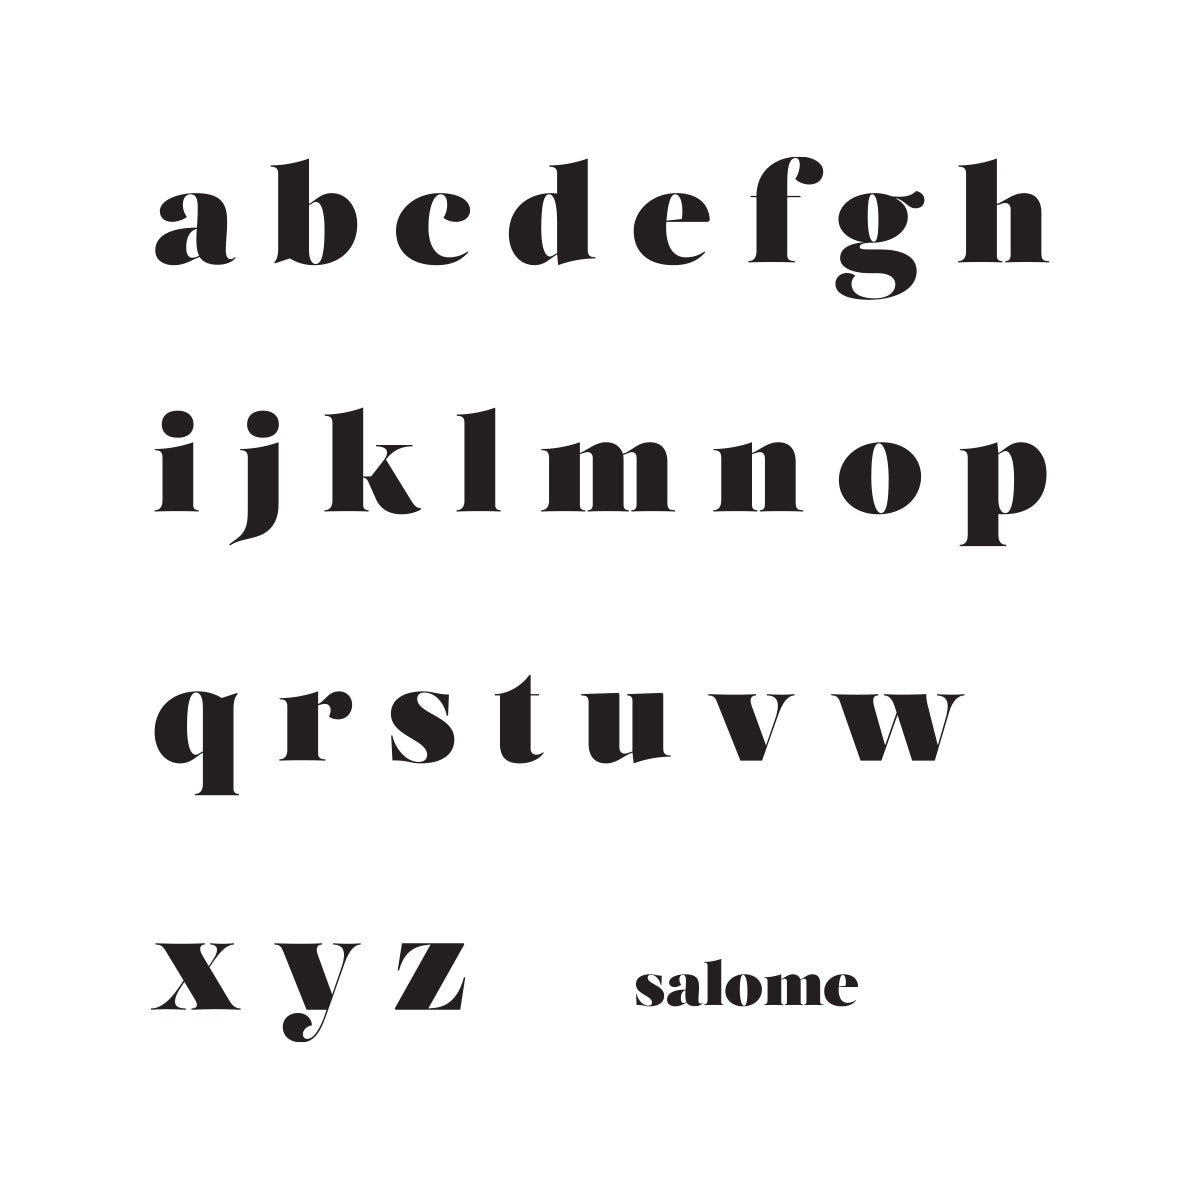 Salome Written Number-1 Line.